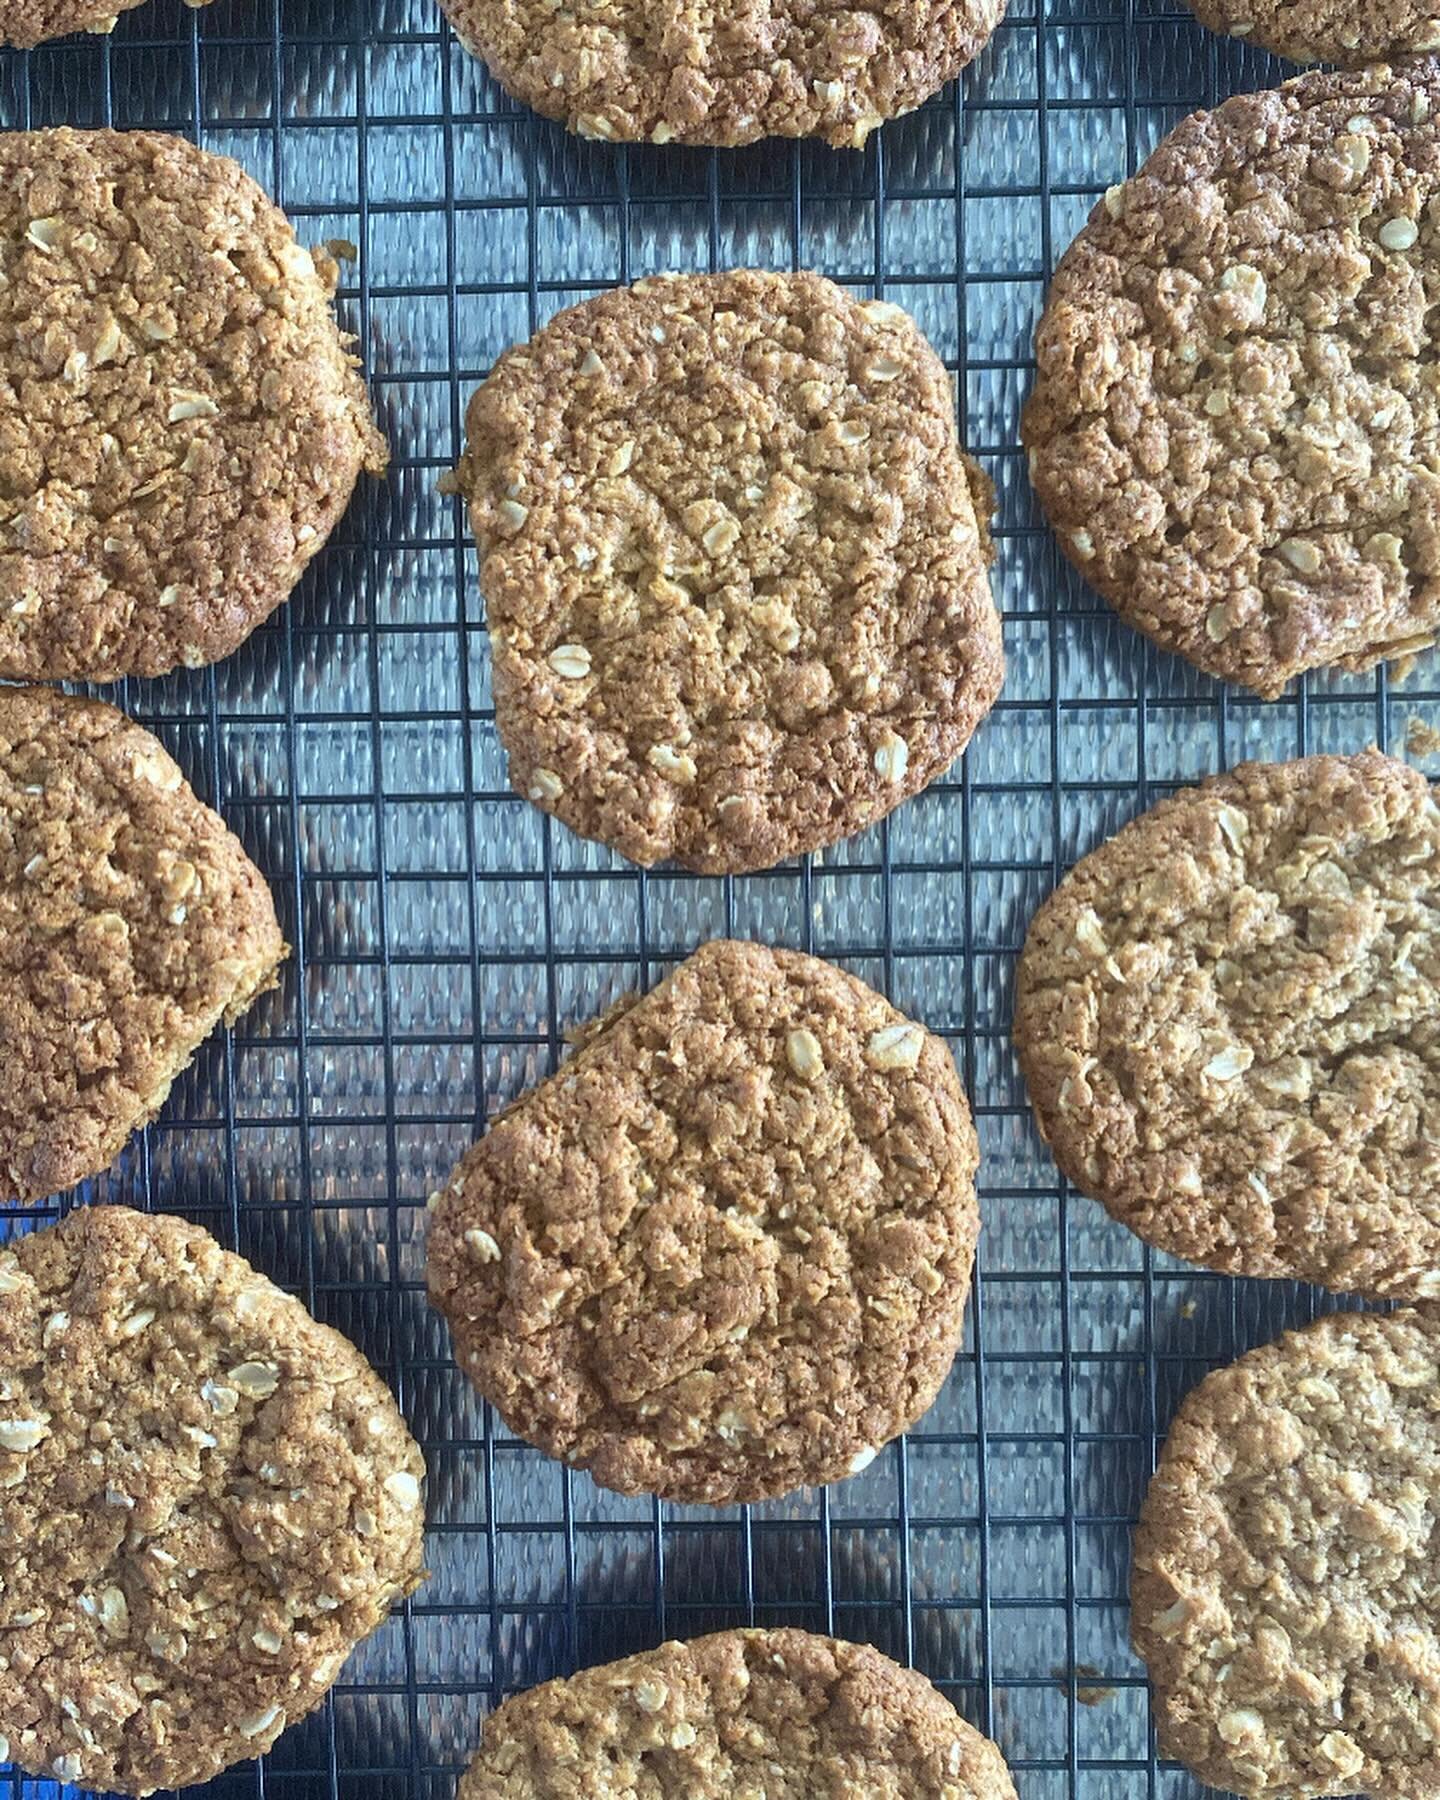 ANZAC Day is a special time for us to reflect, remember, and pay tribute to the brave souls who have served our country. A day rich in history and full of significance. 

Today we watched the sunrise and then baked Anzac biscuits for our neighbours t